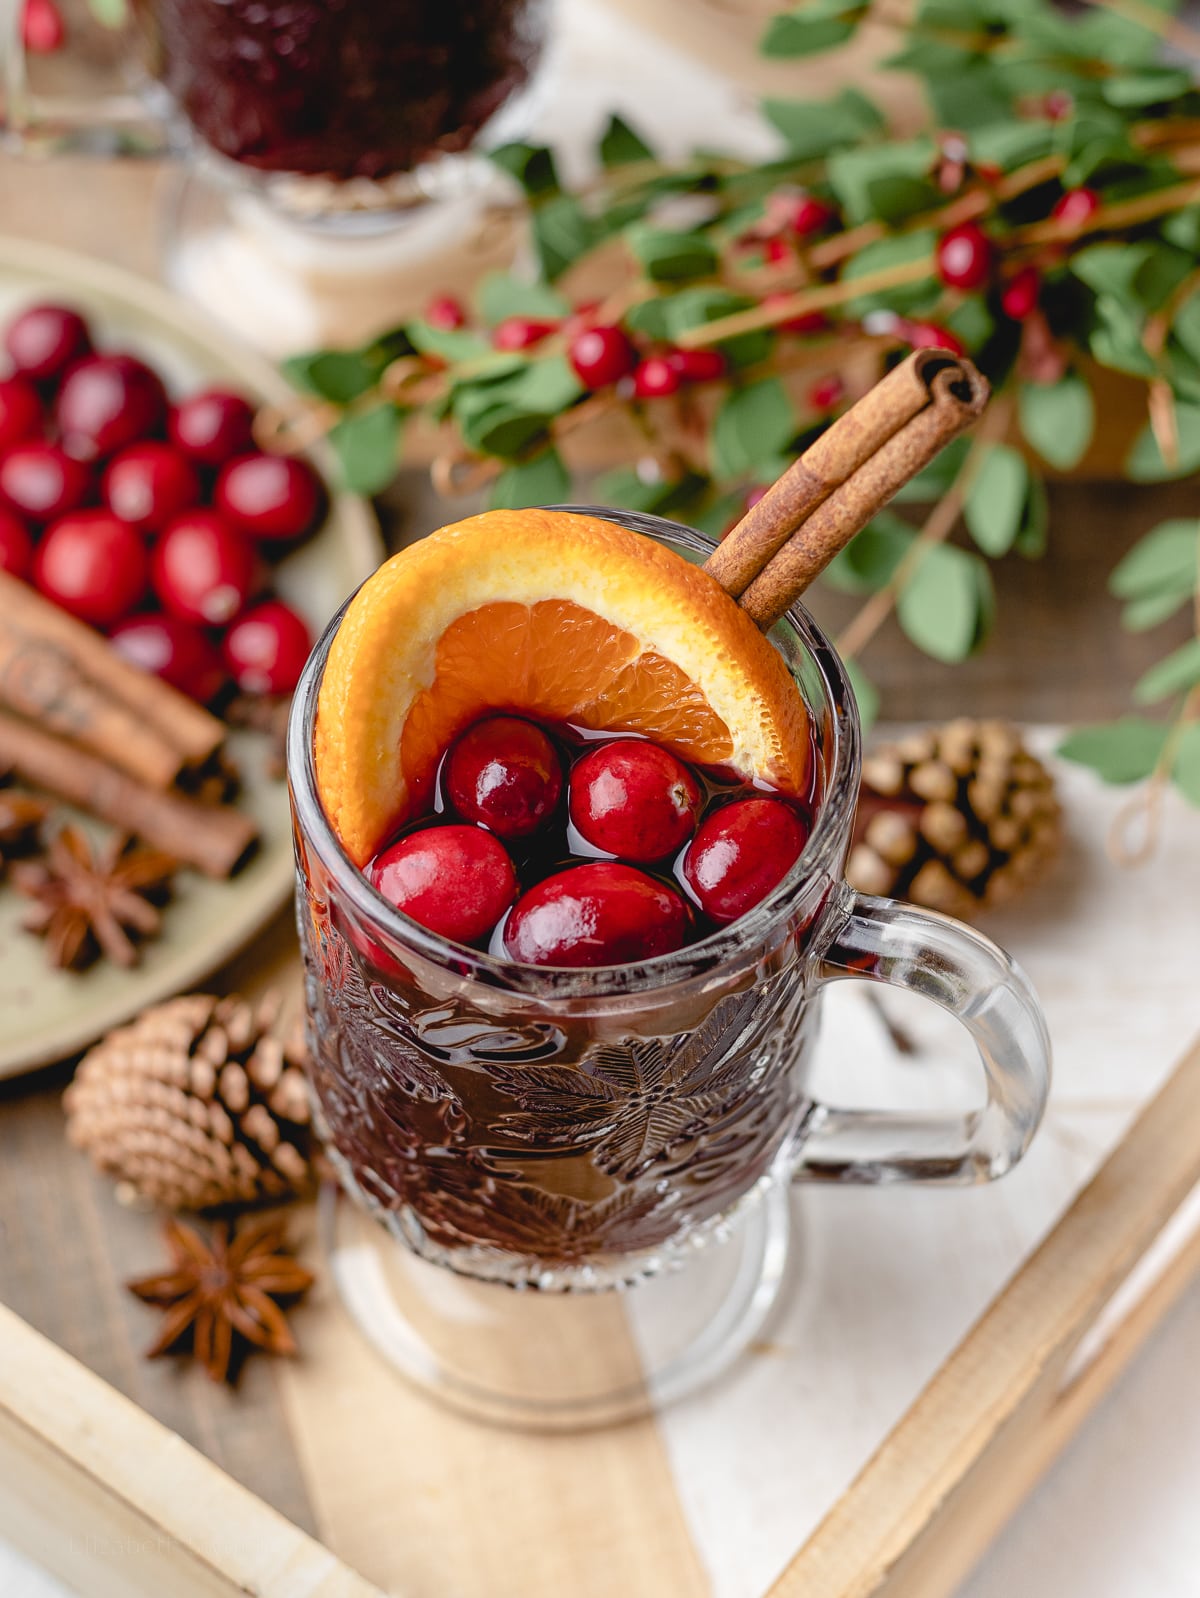 Alcohol free mulled wine in a handled glass mug. Close up to see garnish of orange slice, cranberries, and cinnamon stick.